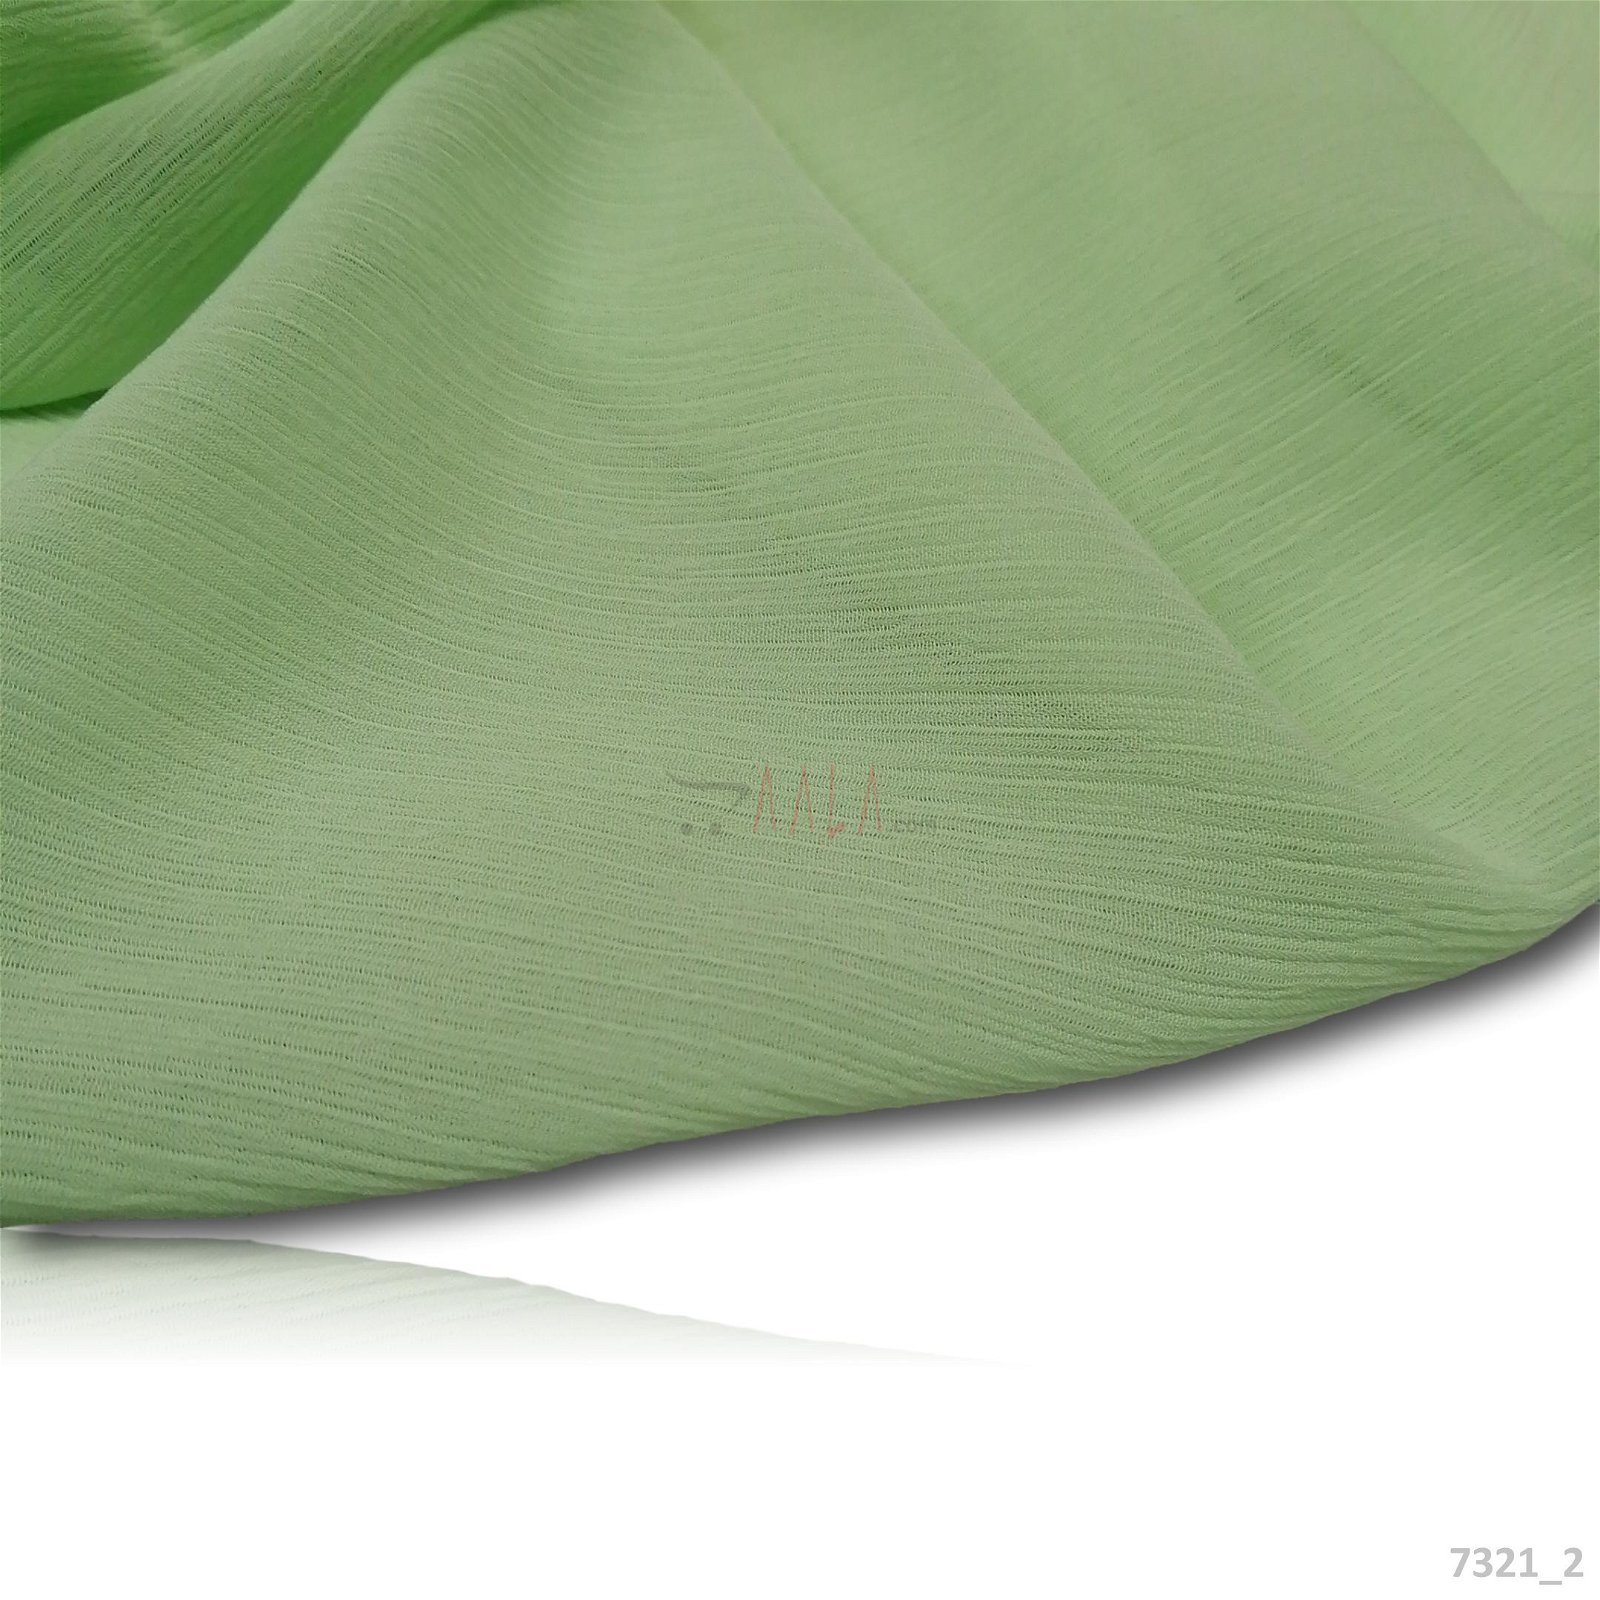 Wrinkle Chiffon Poly-ester 58-Inches GREEN Per-Metre #7321